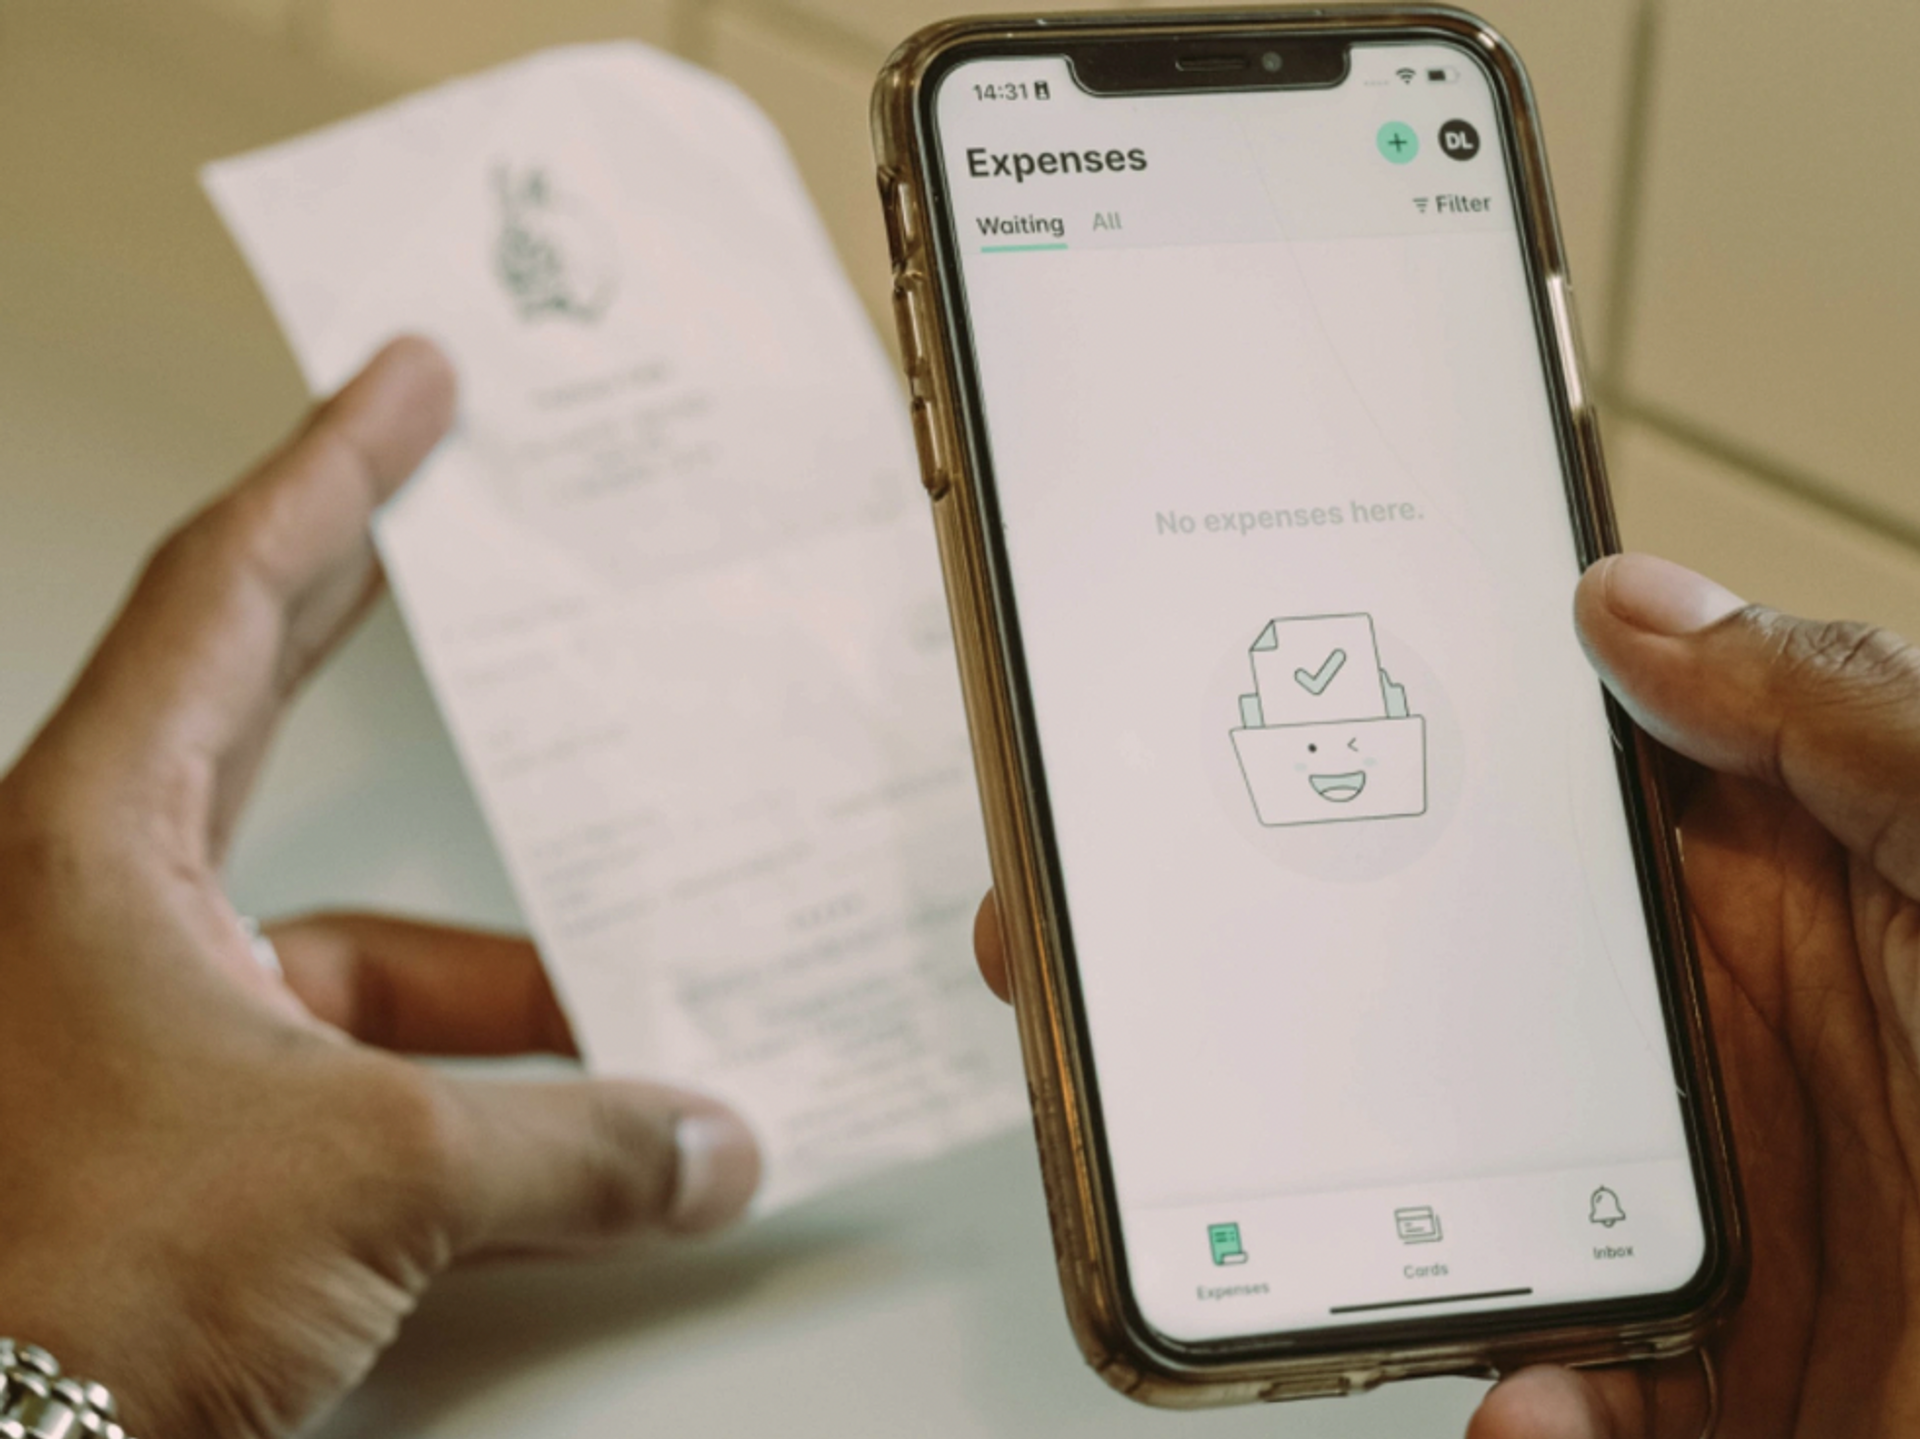 Uploading receipts on a mobile expense app